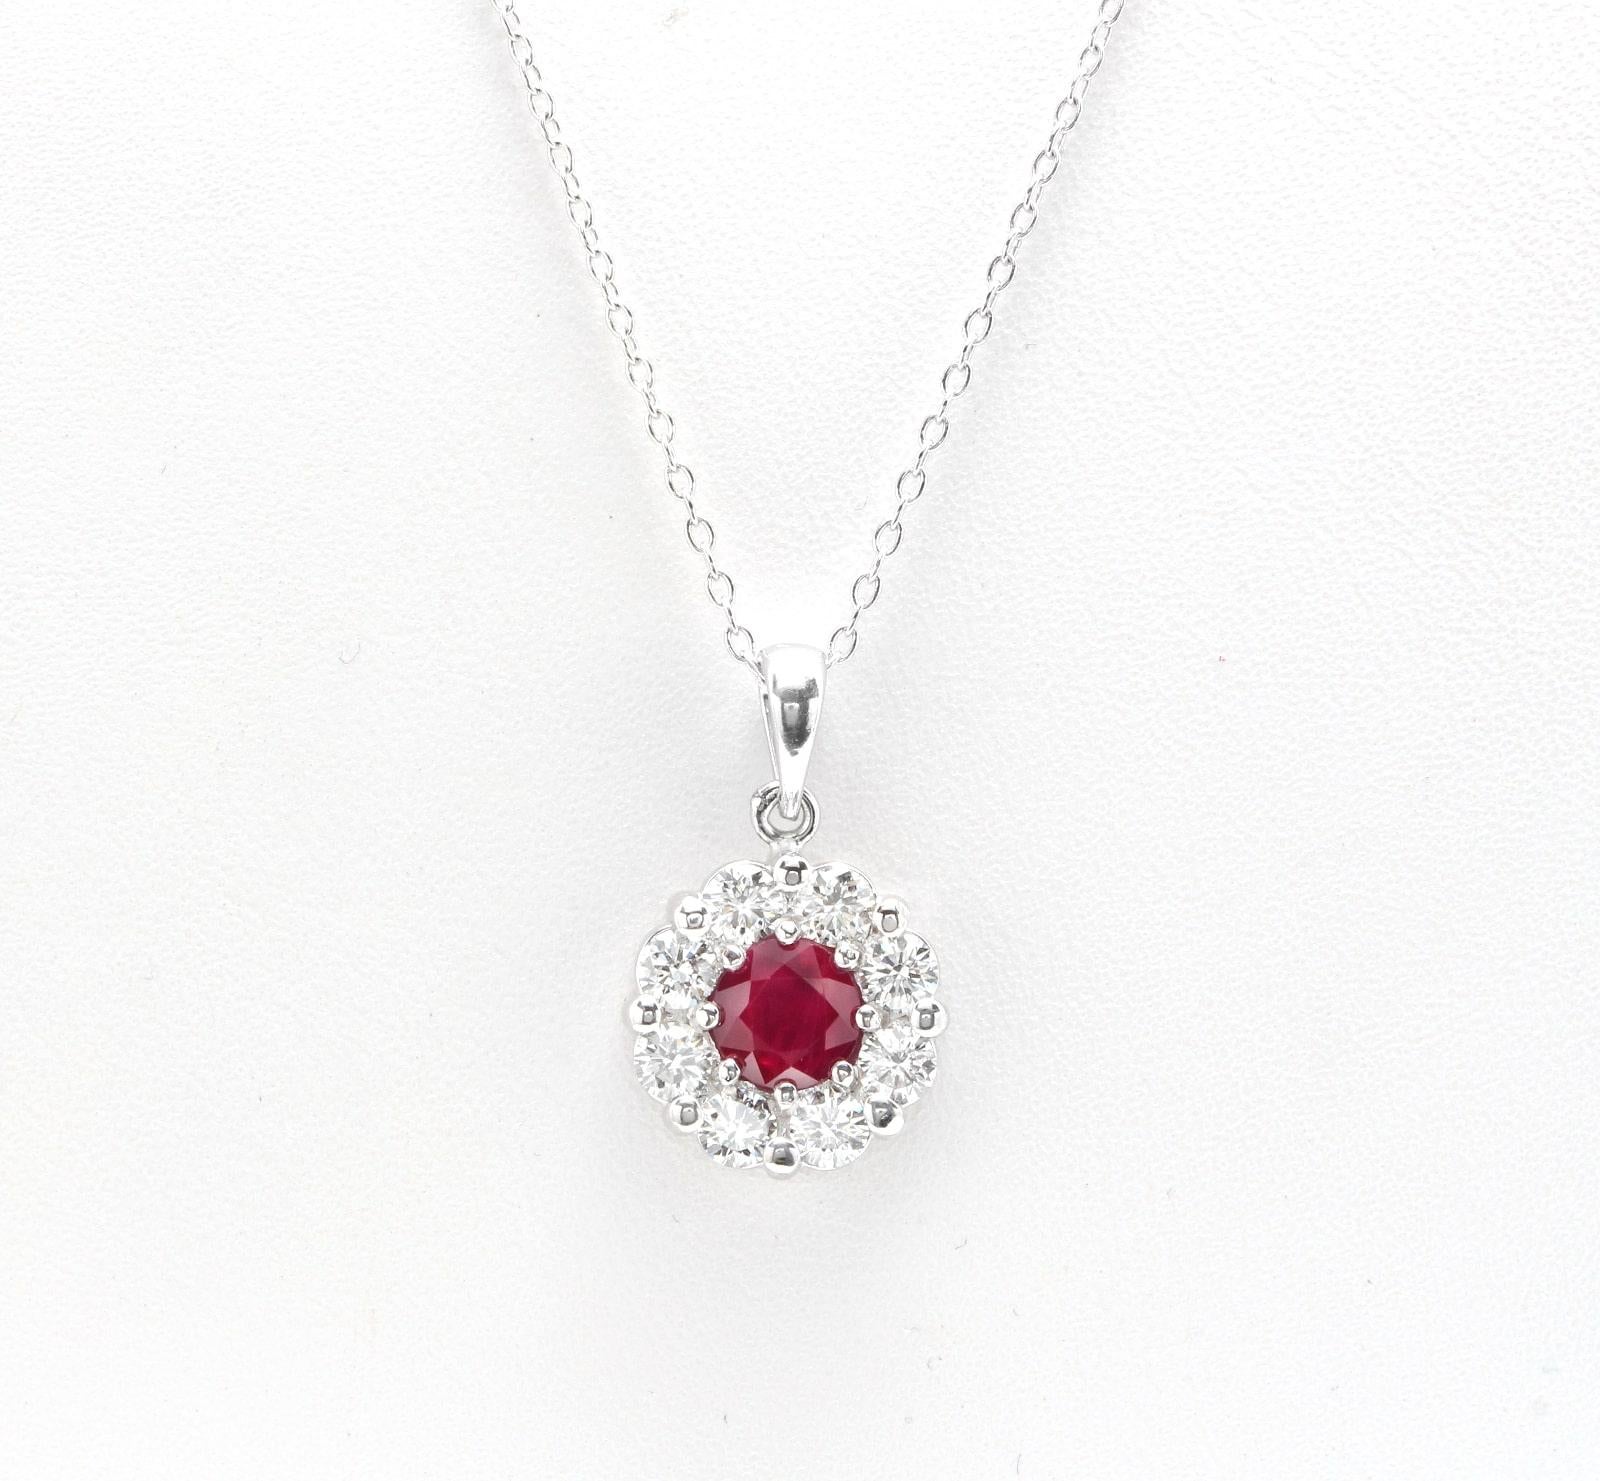 1.55Ct Natural Red Ruby and Diamond 14K Solid White Gold Pendant Necklace

Amazing looking piece! 

Stamped: 14K

Suggested Replacement Value: 3,000.00 

Natural Round Cut Ruby Weights Approx. 0.70 Carats (Natural)

Ruby Measures: Approx.